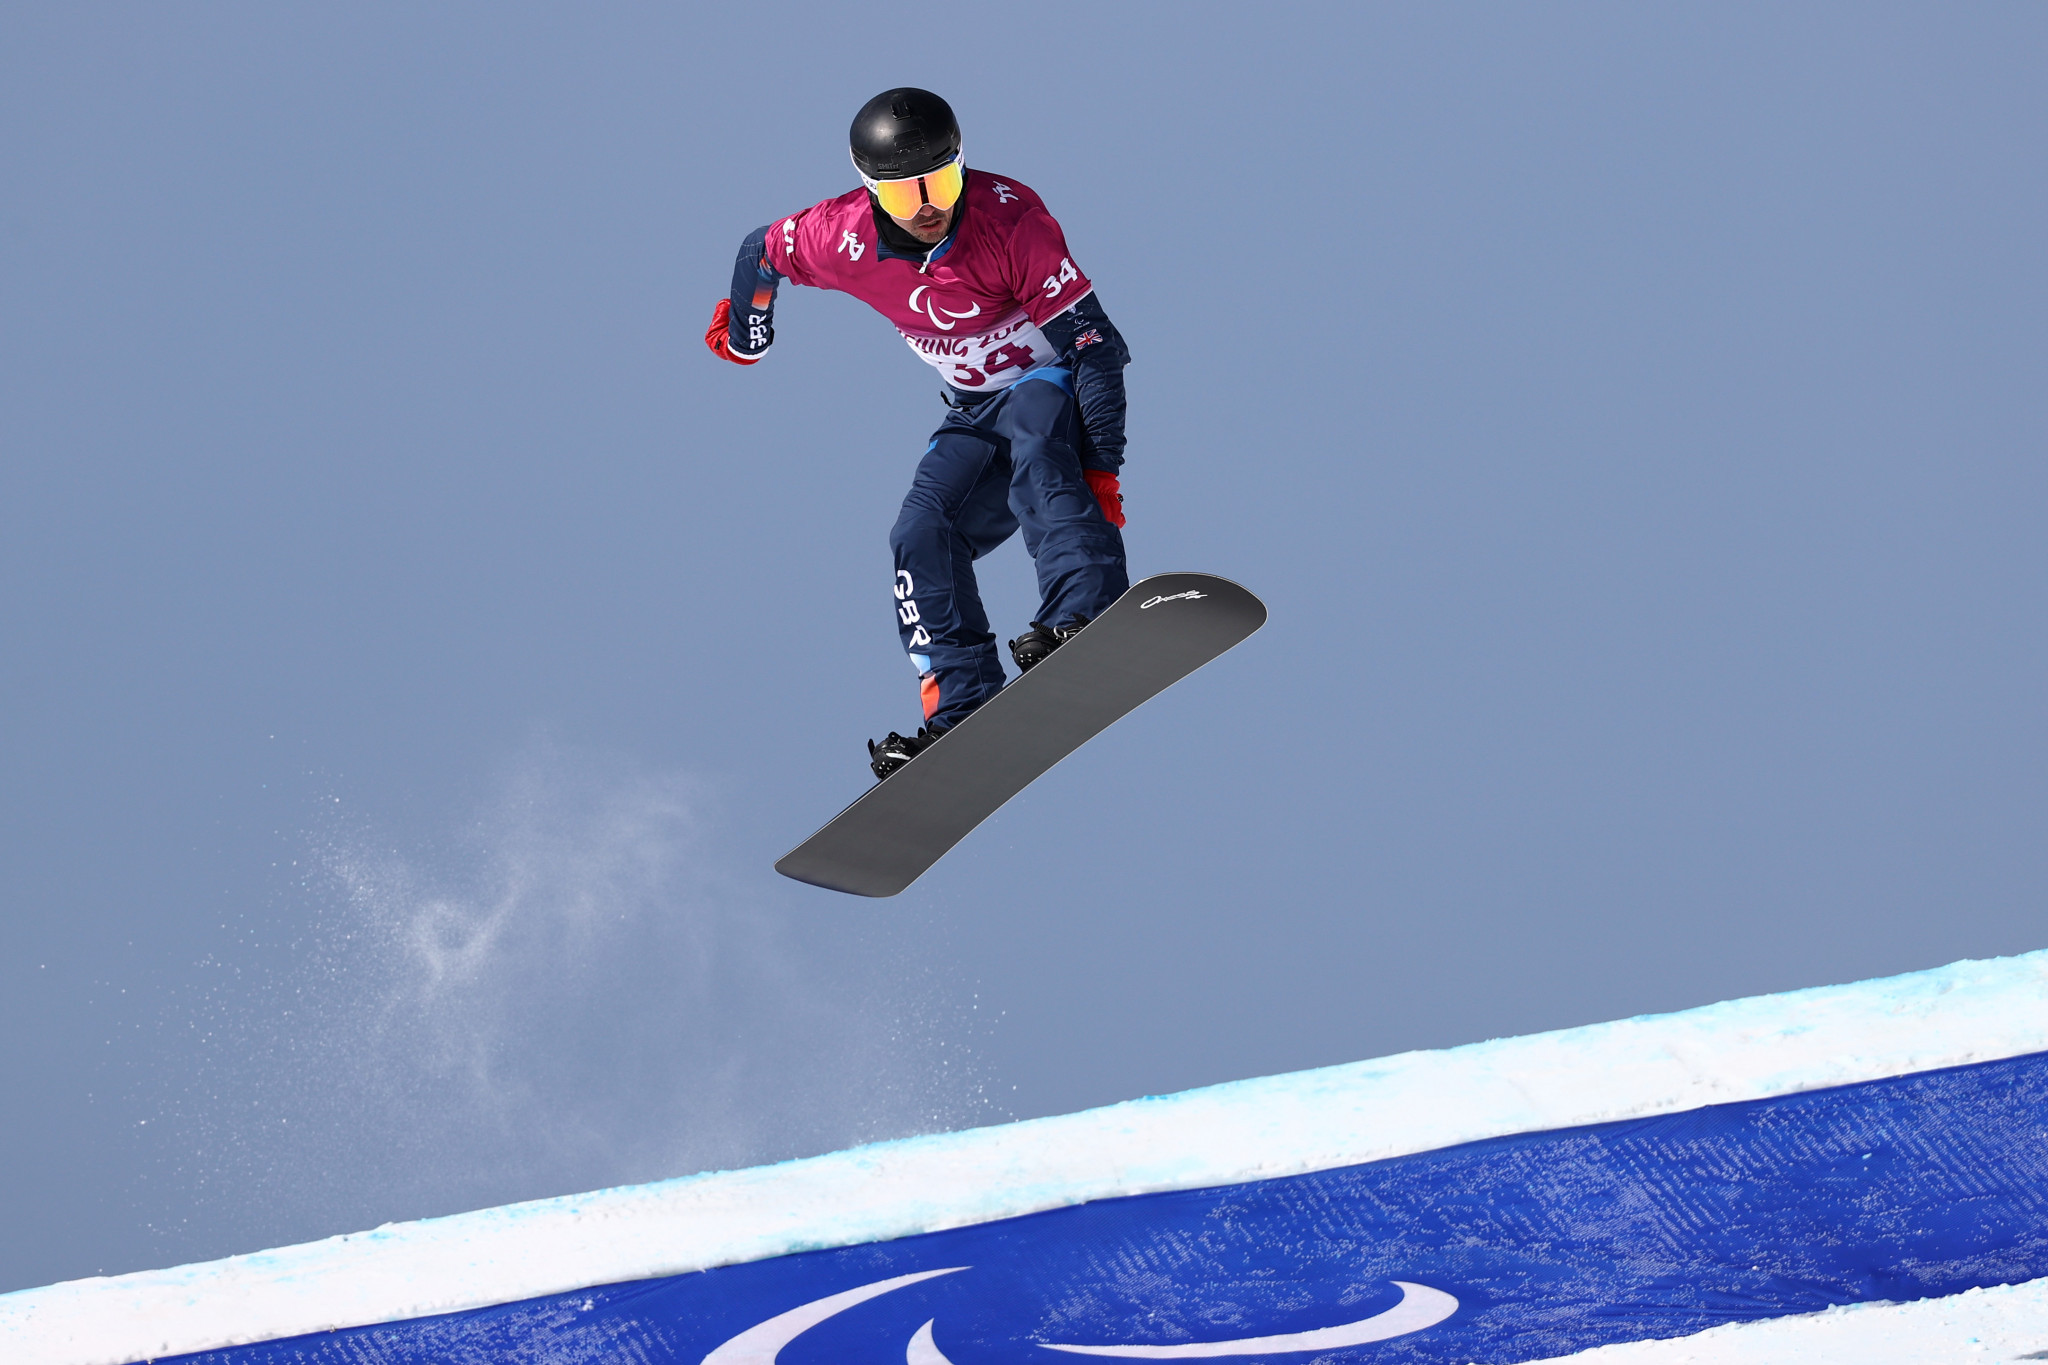 Ollie Hill won Britain's first Paralympic snowboard medal with a bronze in the banked slalom LL2 event ©Getty Images